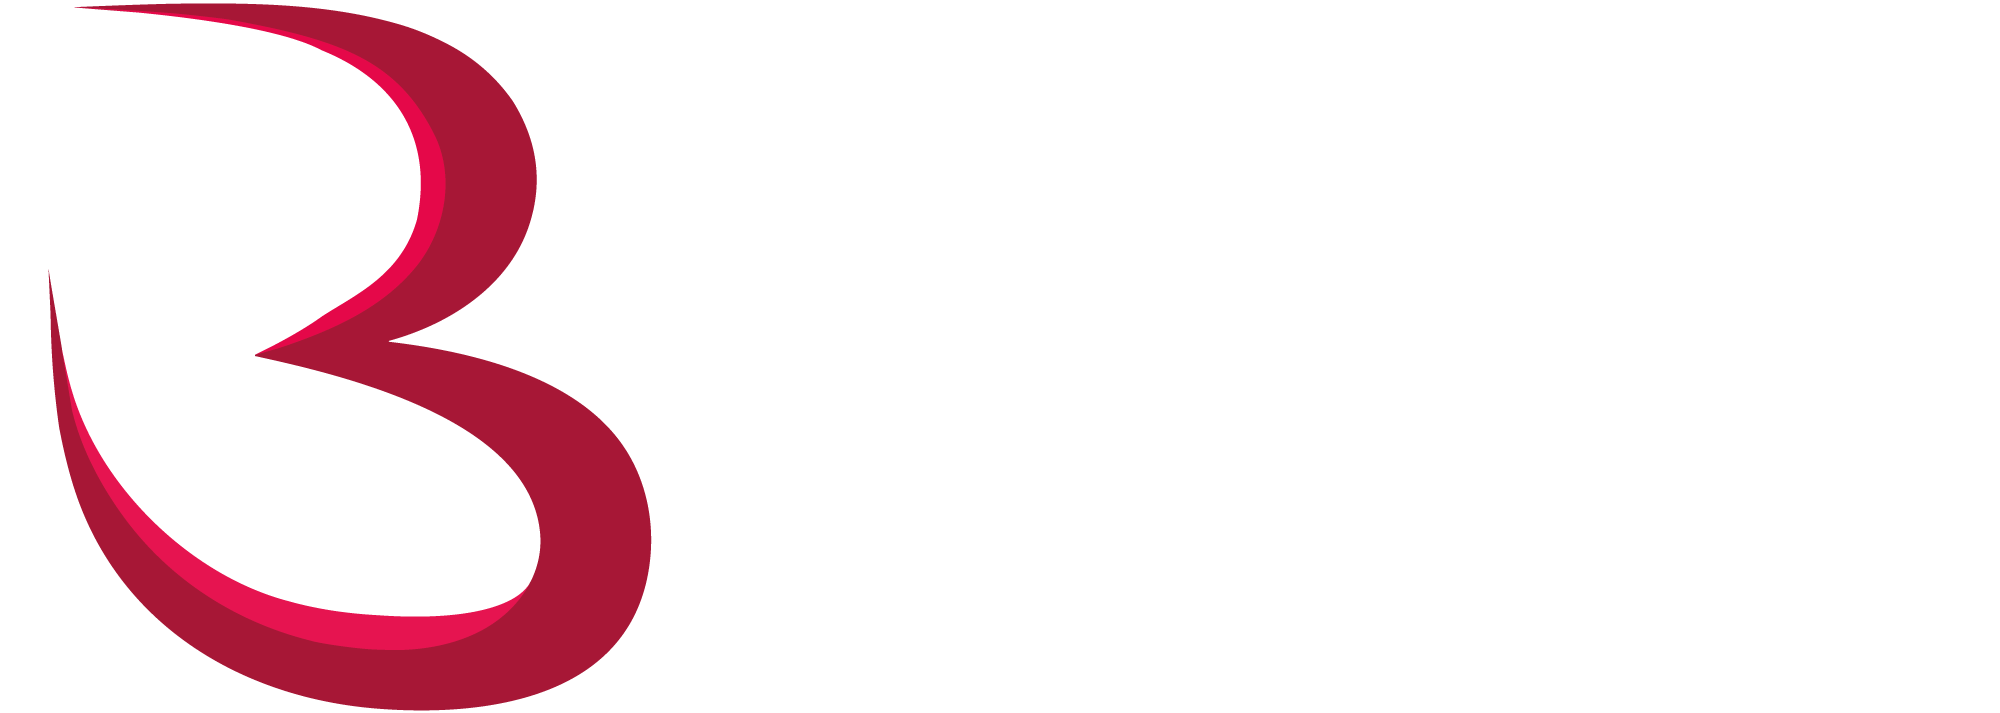 Bstretching